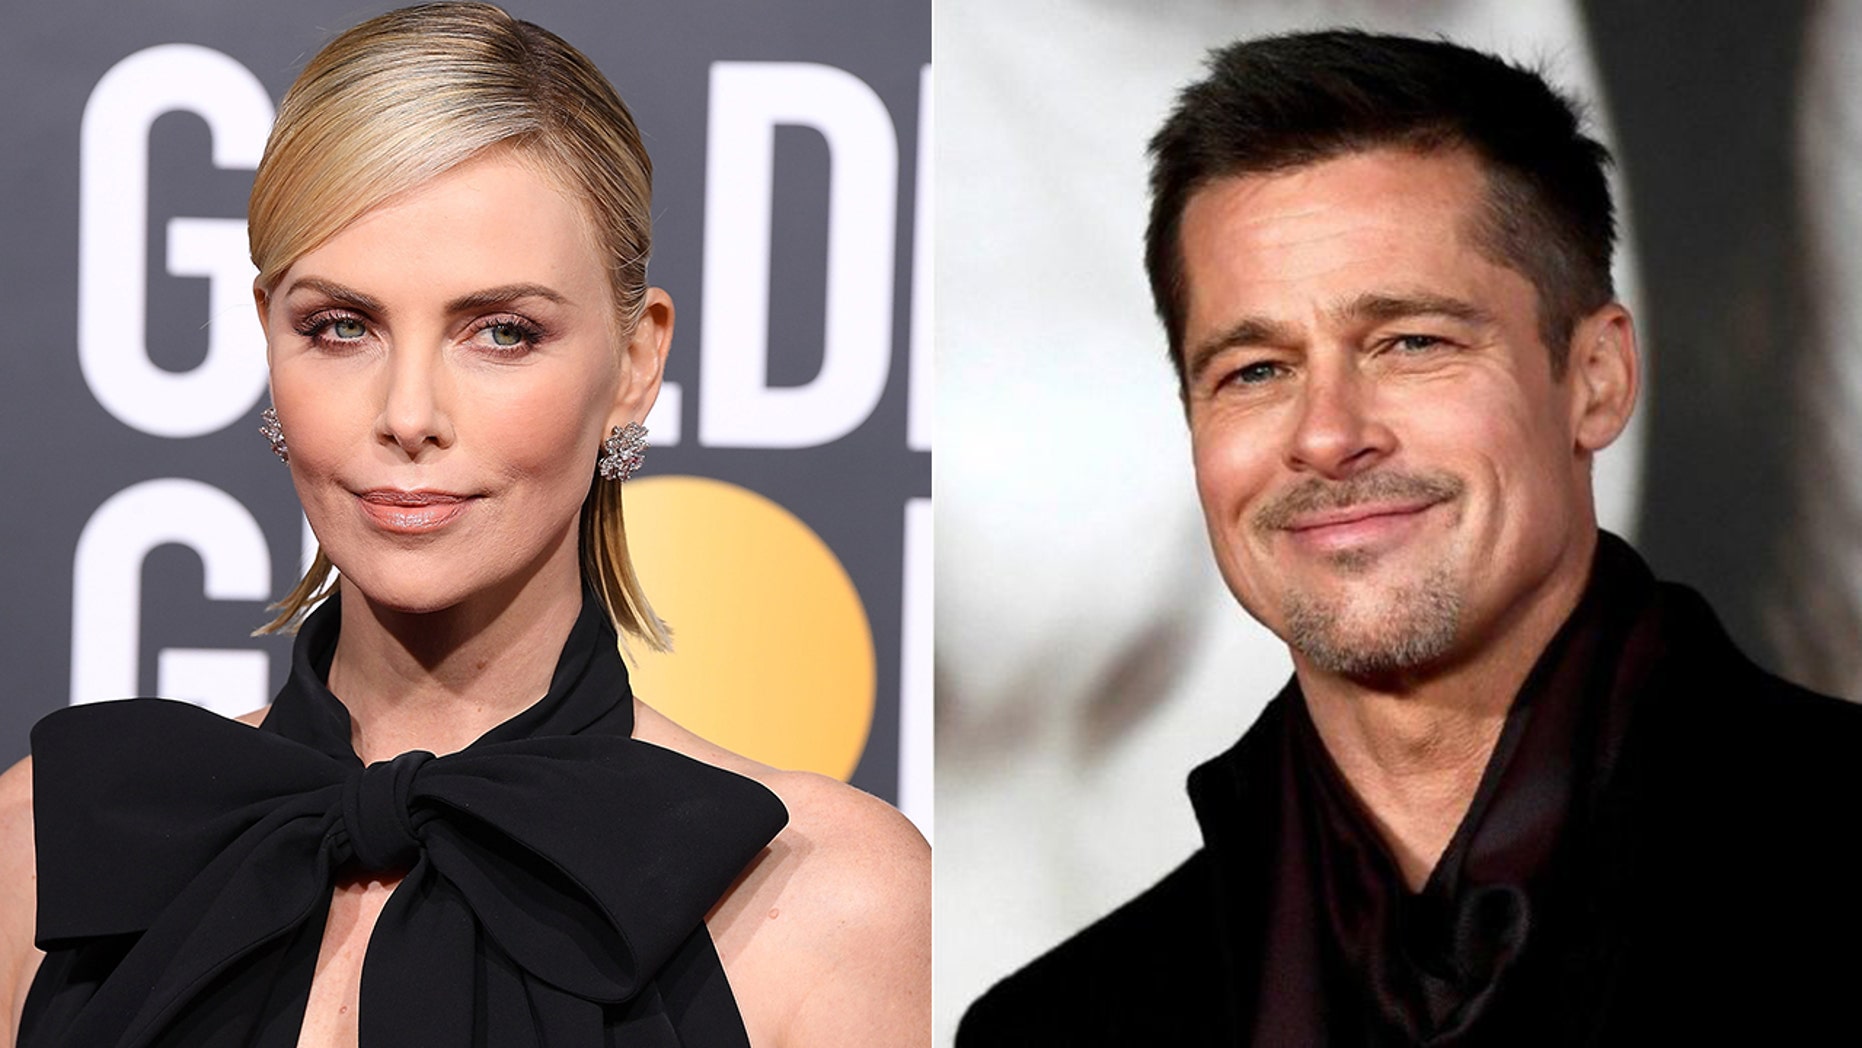 Charlize Theron and Brad Pitt dating after meeting through her ex Sean Penn: report